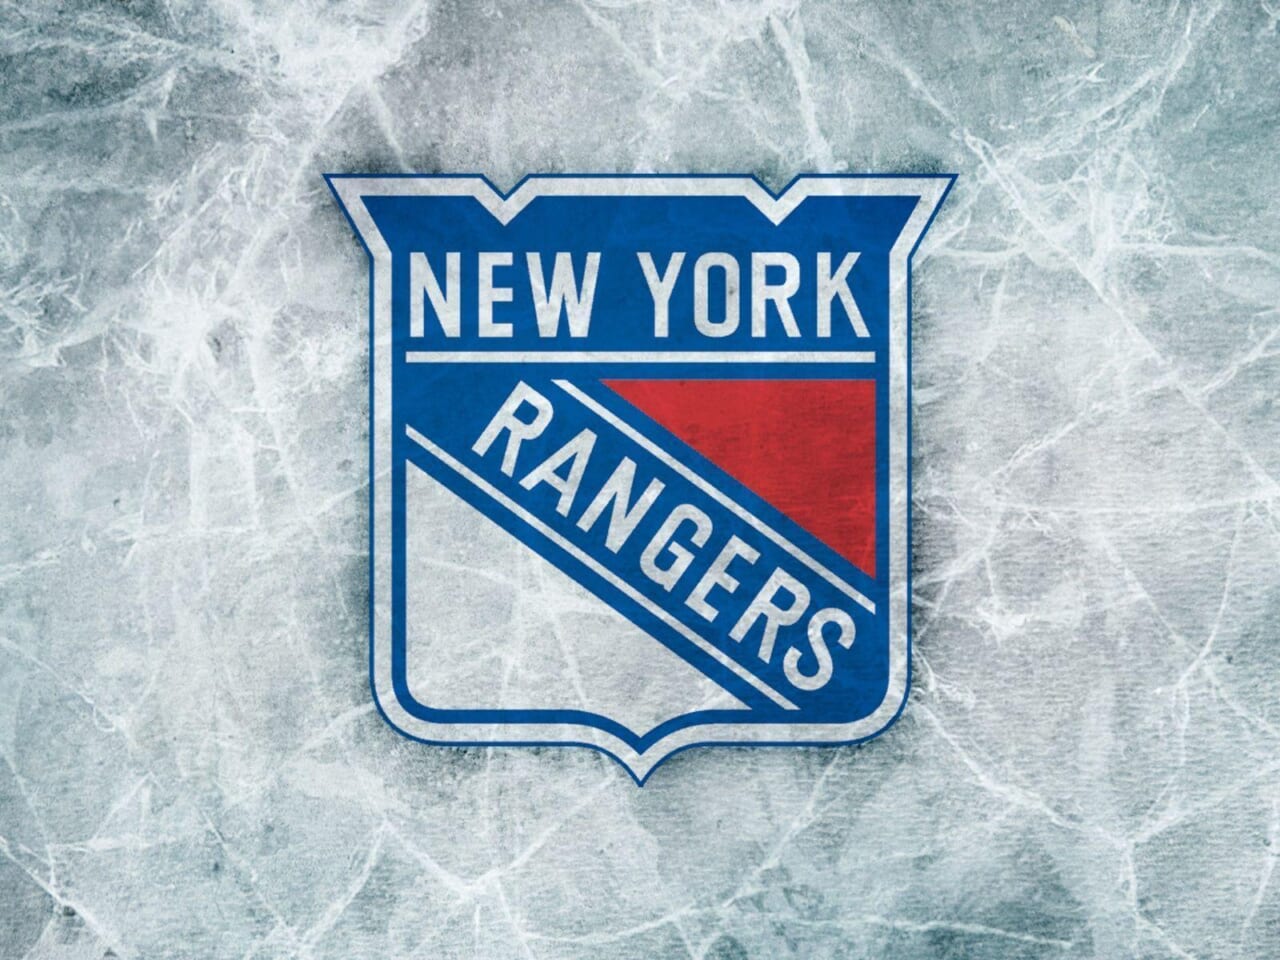 How the New York Rangers angered a nation